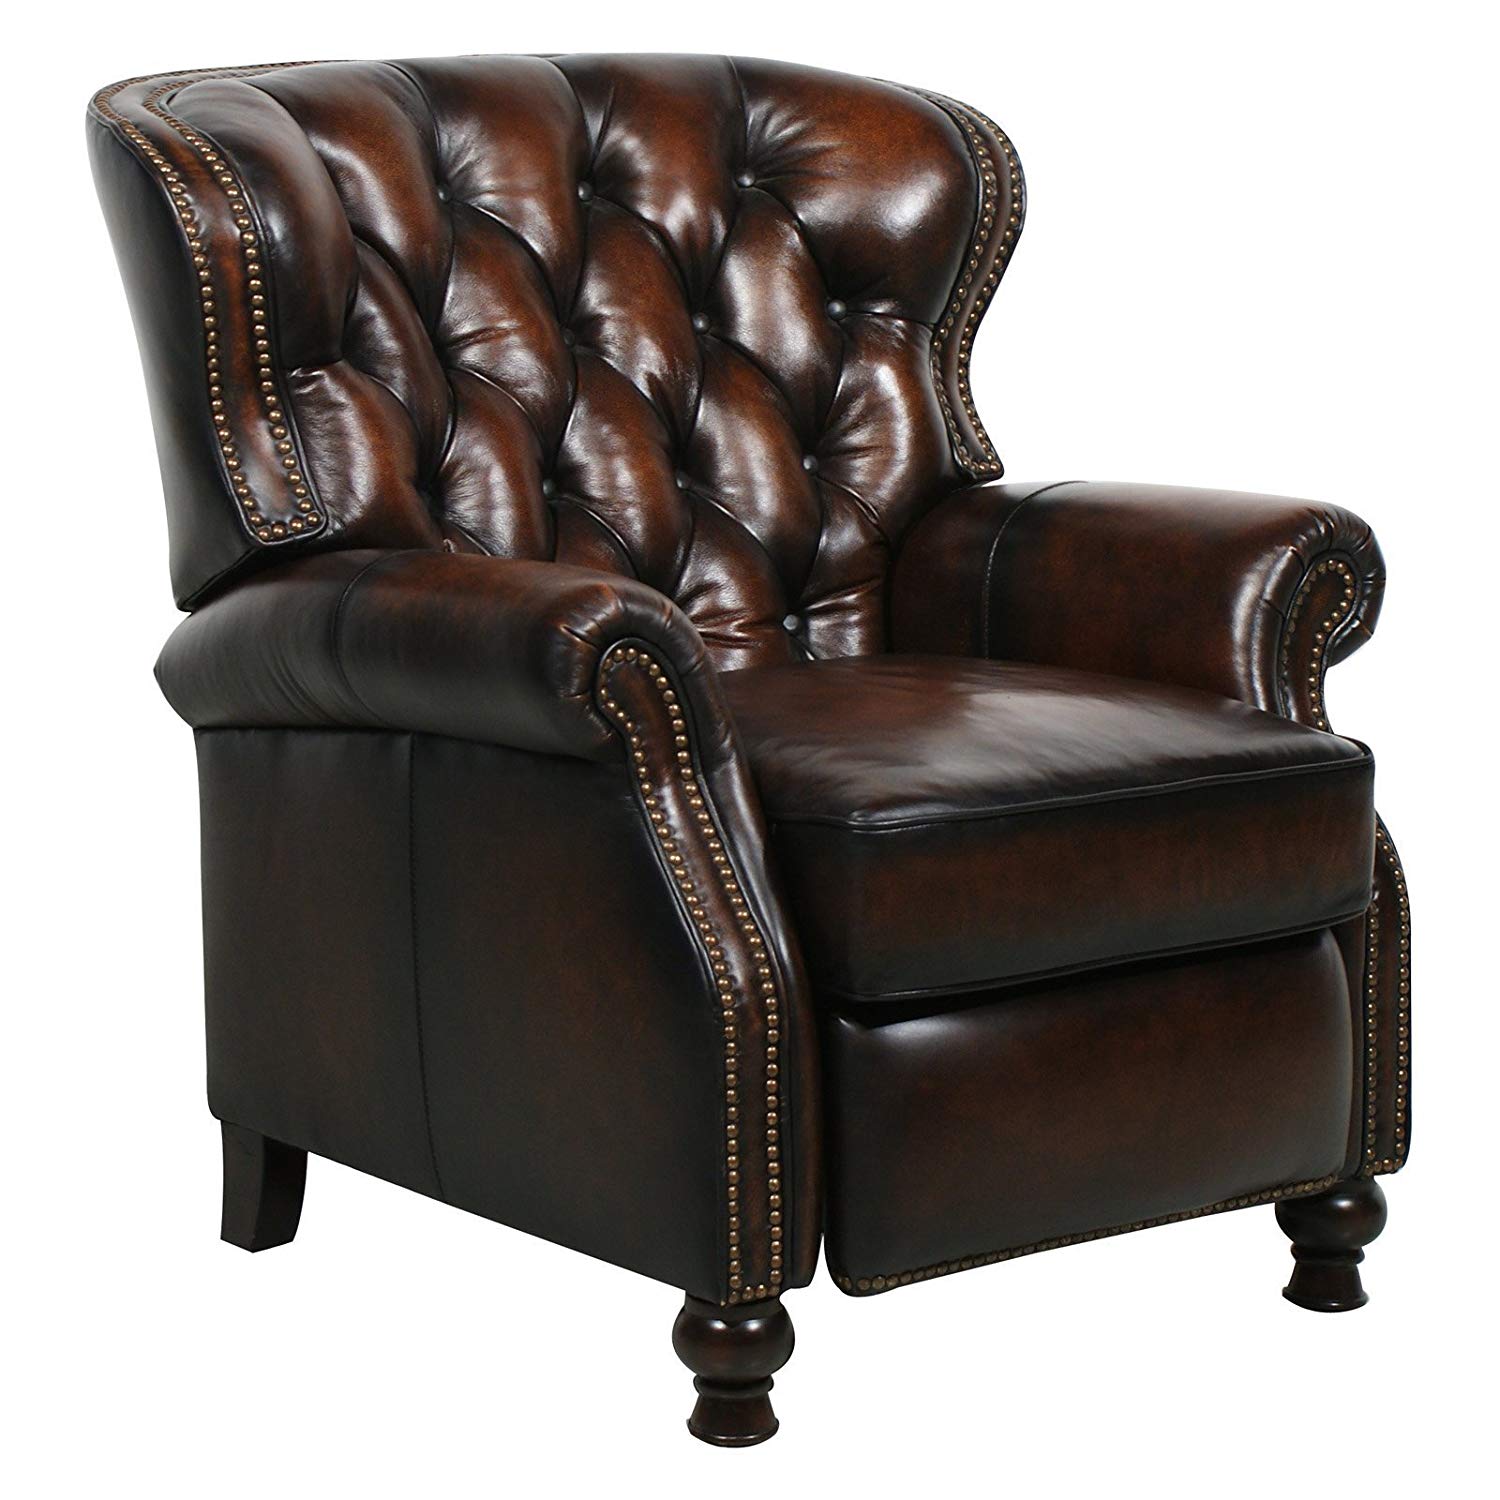 Presidential Manual Recliner by Barcalounger